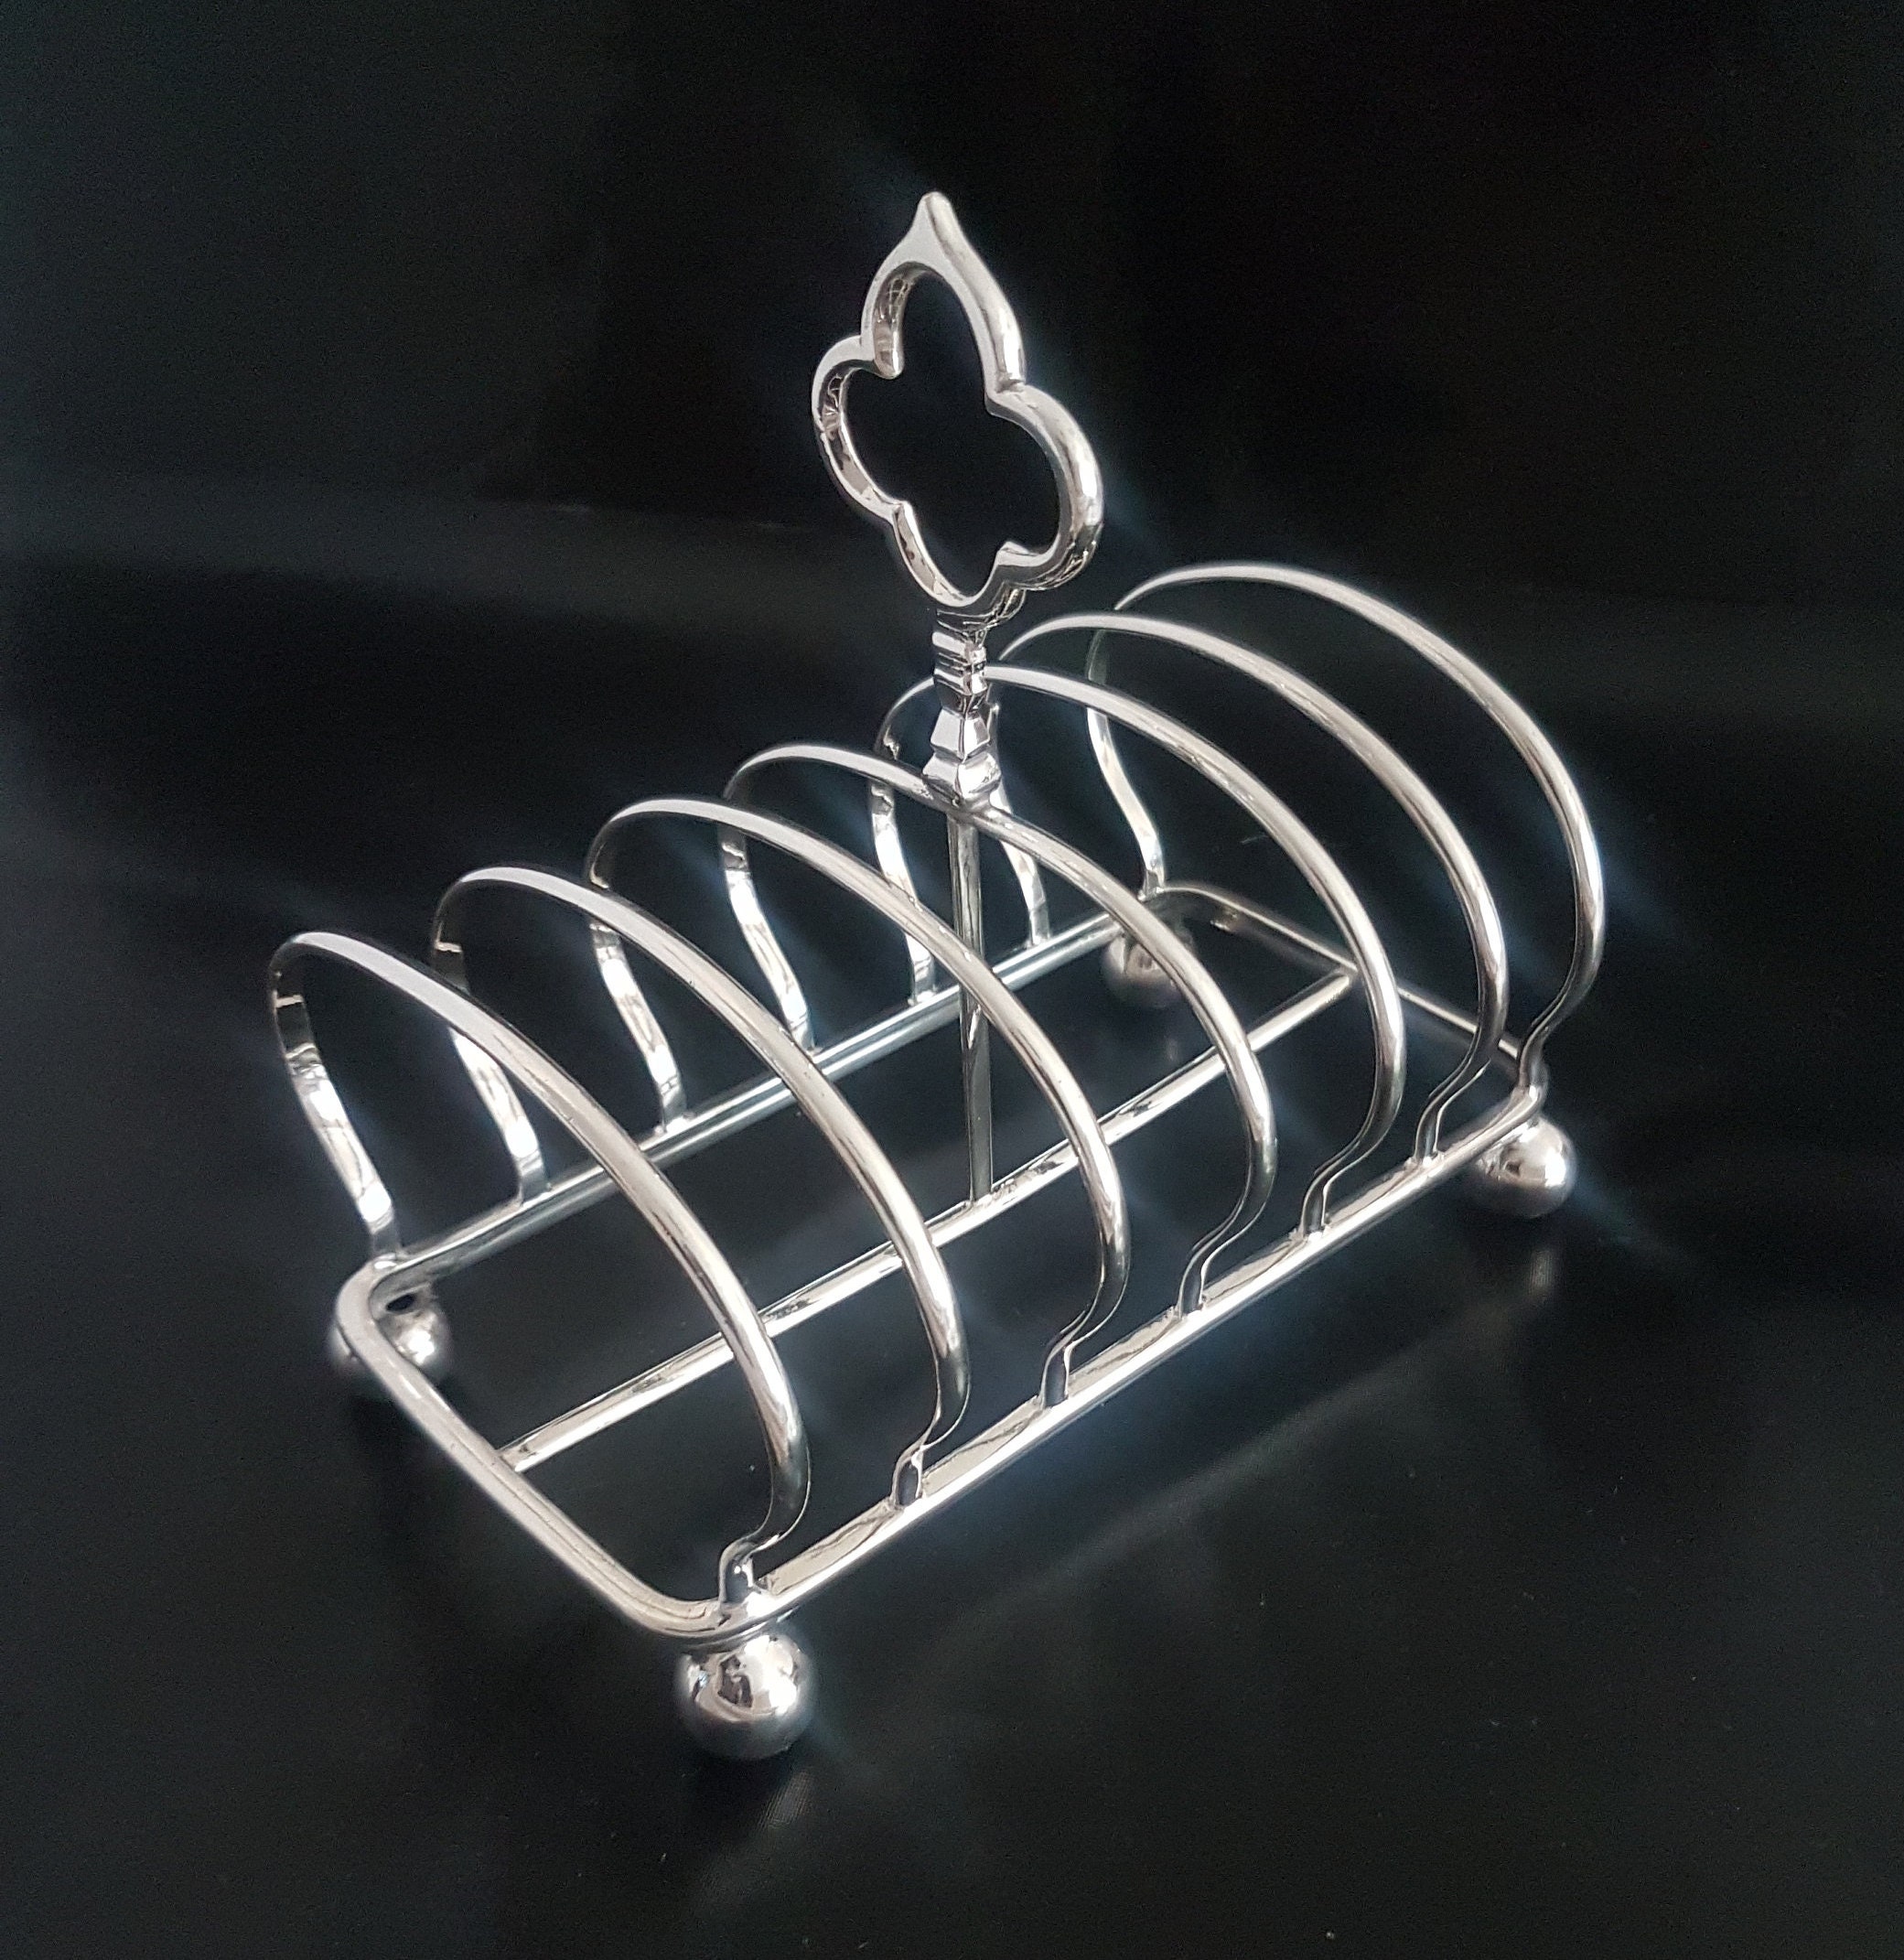 Silver Plated Toast Rack a Scarce Edwardian Large 6 Slice Toast Rack by  Elkington & Co for the Royal Mail Steam Packet Company. Dated 1906 